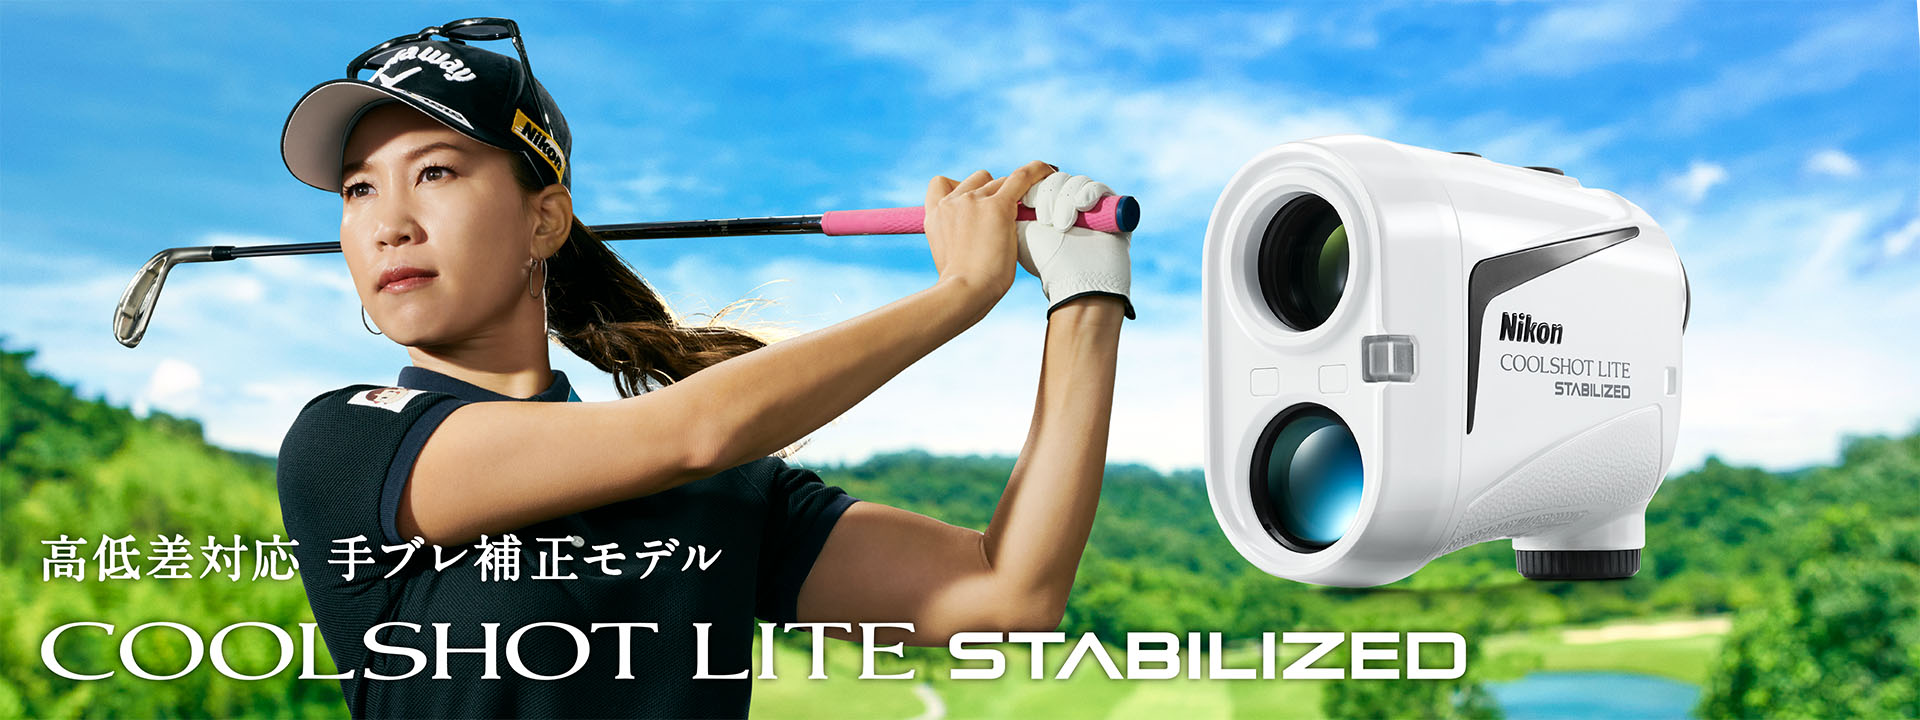 Nikon COOLSHOT STABILIZED ニコン レーザー距離計